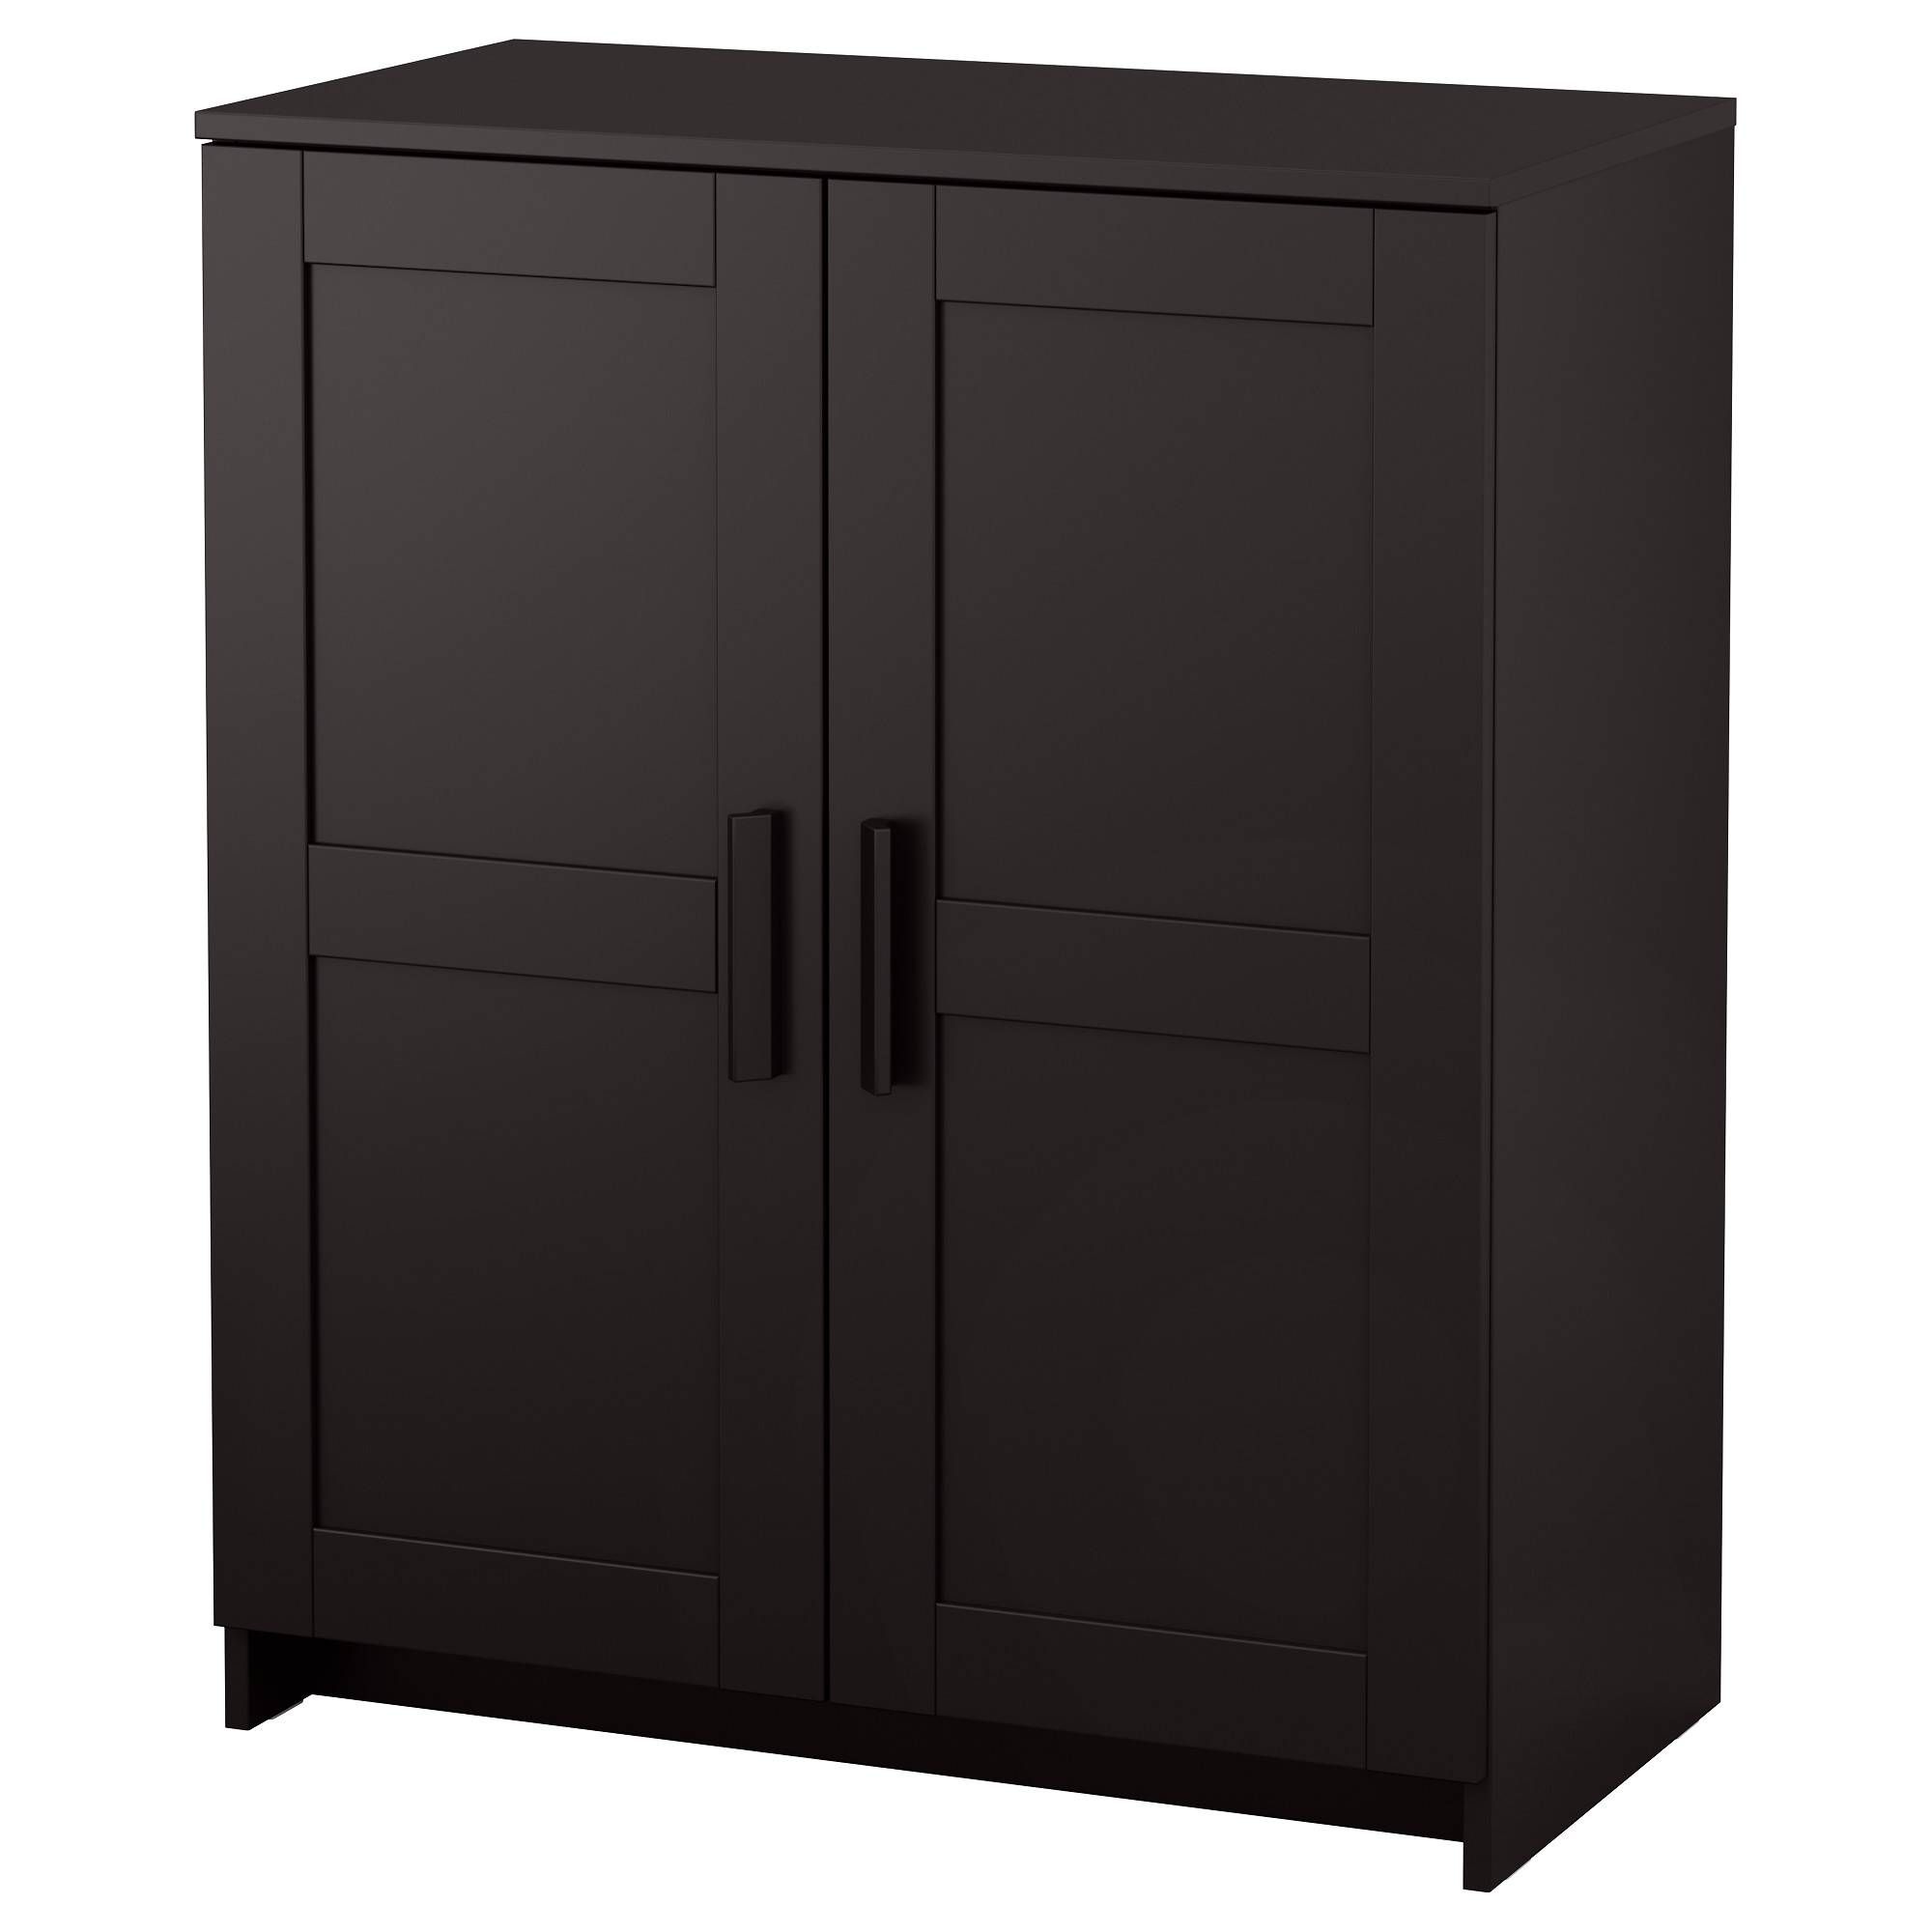 Cabinets & Sideboards – Ikea Pertaining To Shallow Sideboard Cabinet (View 14 of 20)